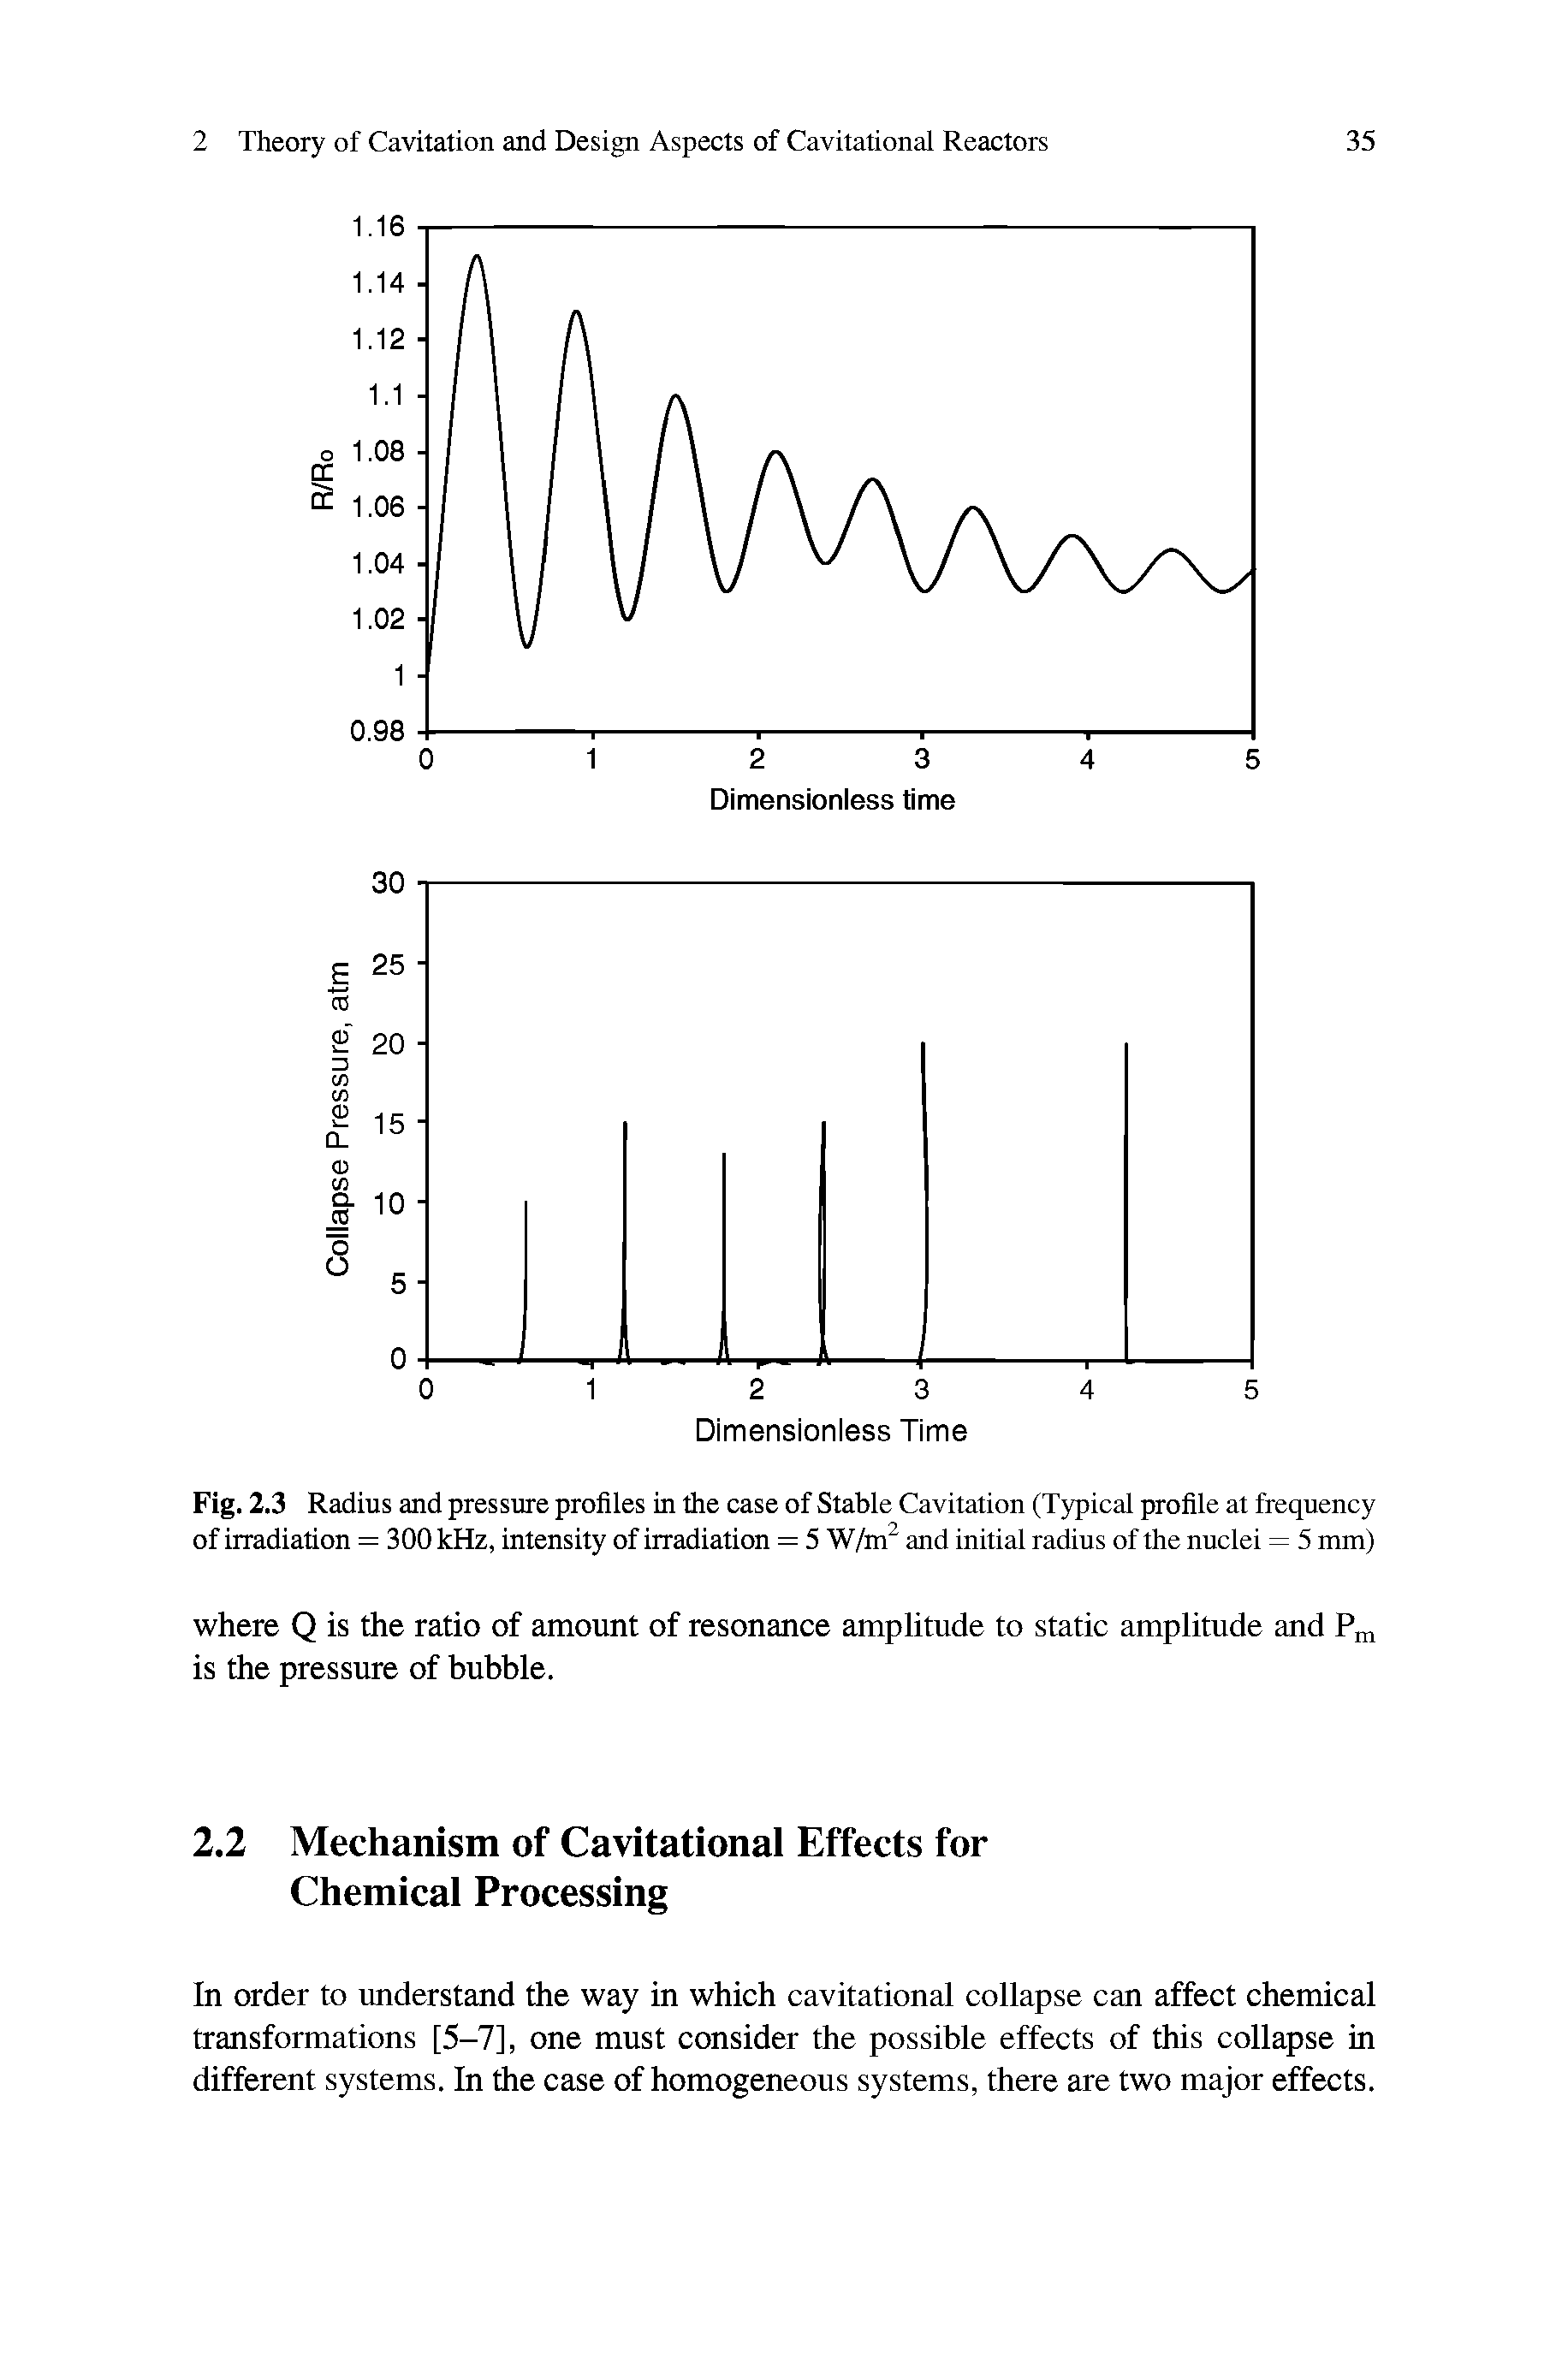 Fig. 2.3 Radius and pressure profiles in the case of Stable Cavitation (Typical profile at frequency of irradiation = 300 kHz, intensity of irradiation = 5 W/m2 and initial radius of the nuclei = 5 mm)...